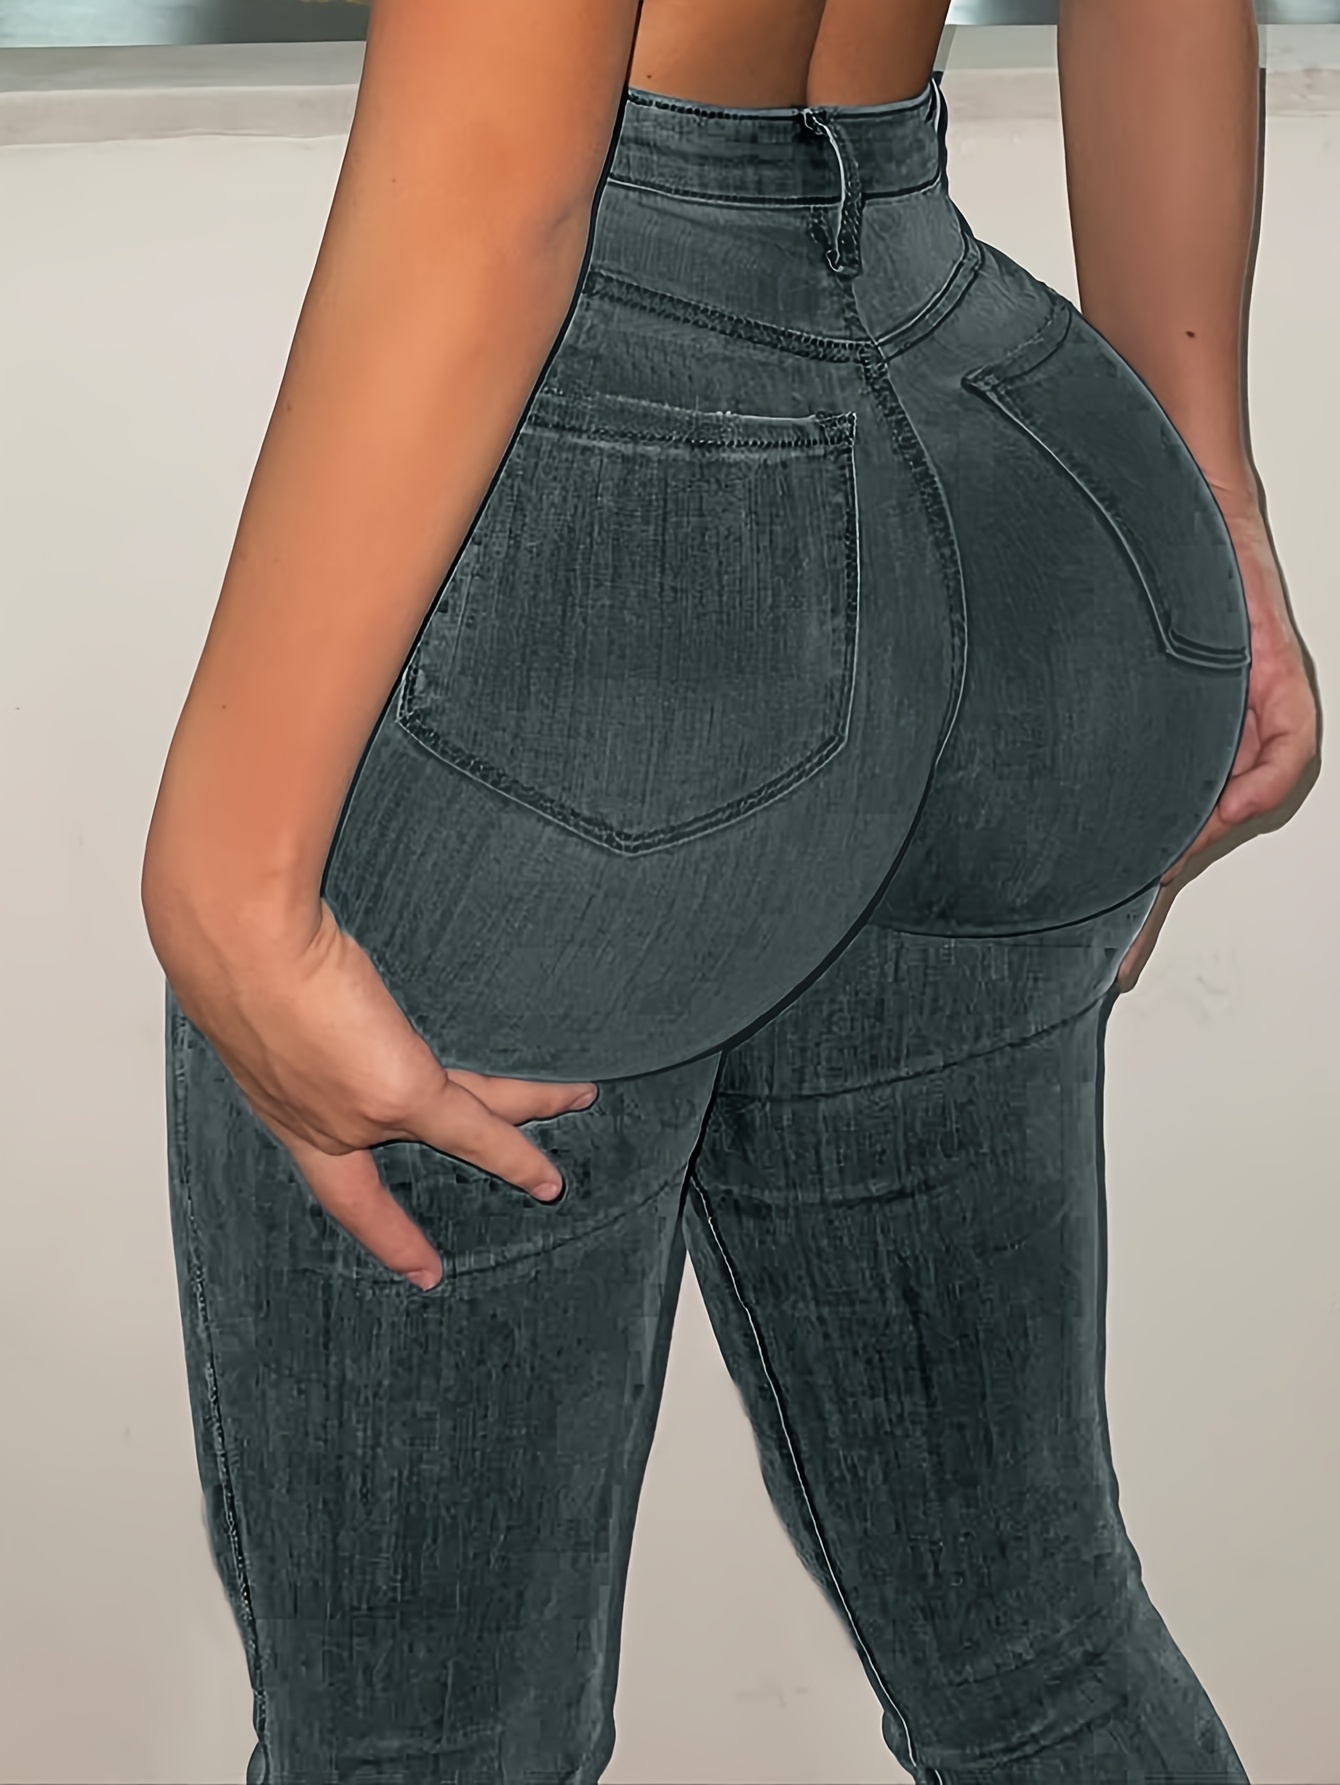 Butt-lifting Sexy Skinny Jeans, High-stretch Slim Fitted Comfortable Denim  Pants, Women's Denim Jeans & Clothing